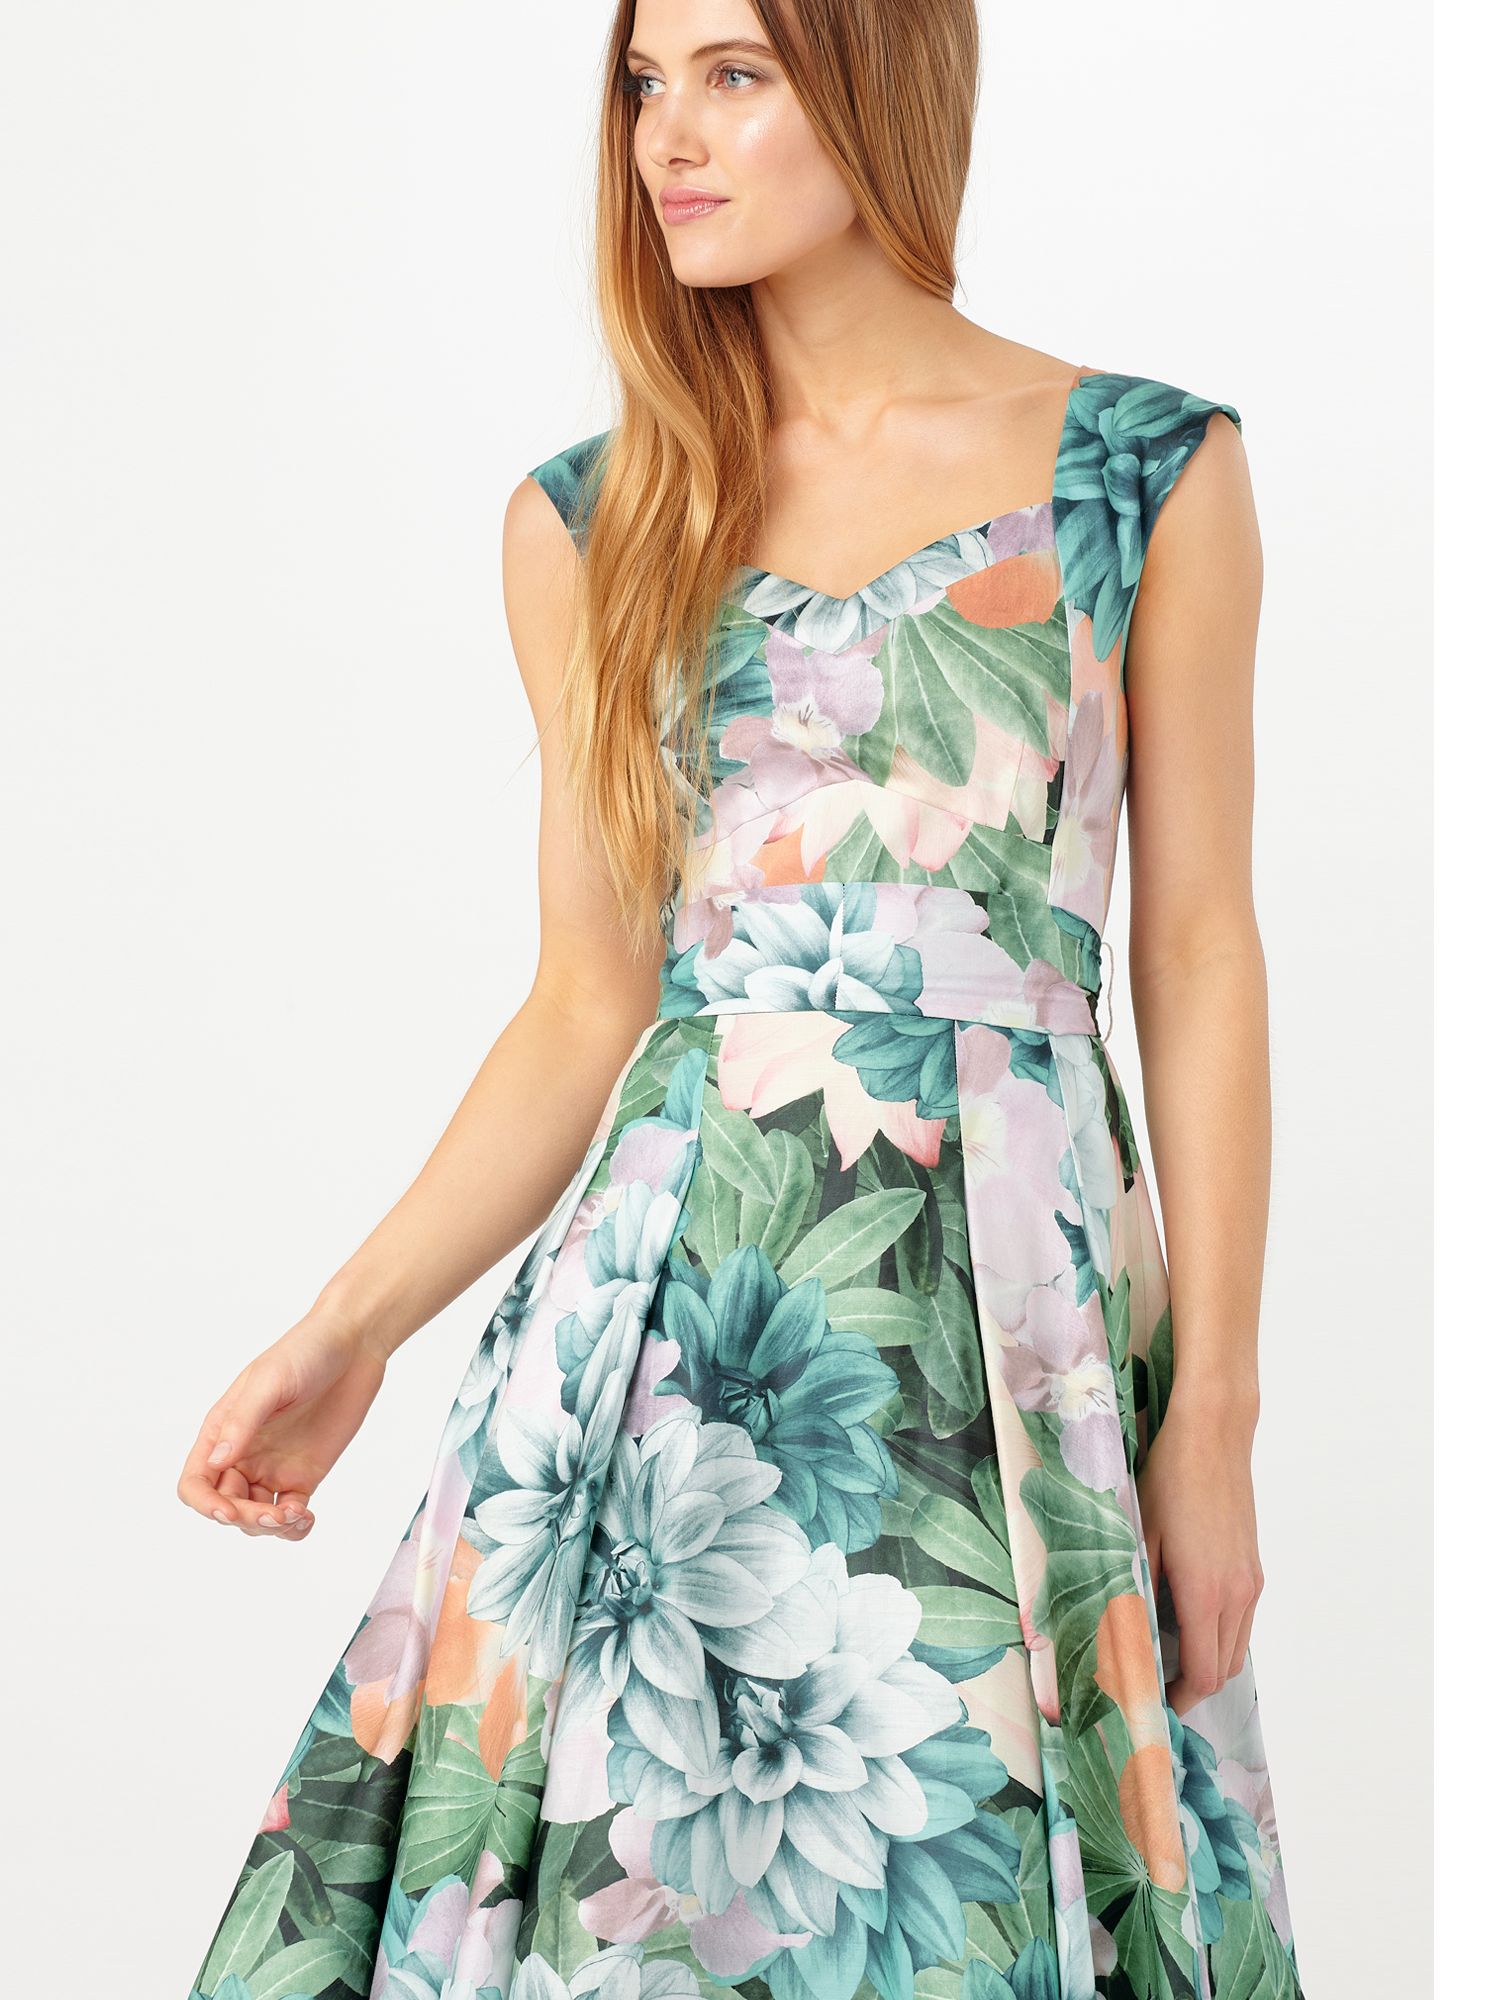 phase eight navy floral dress